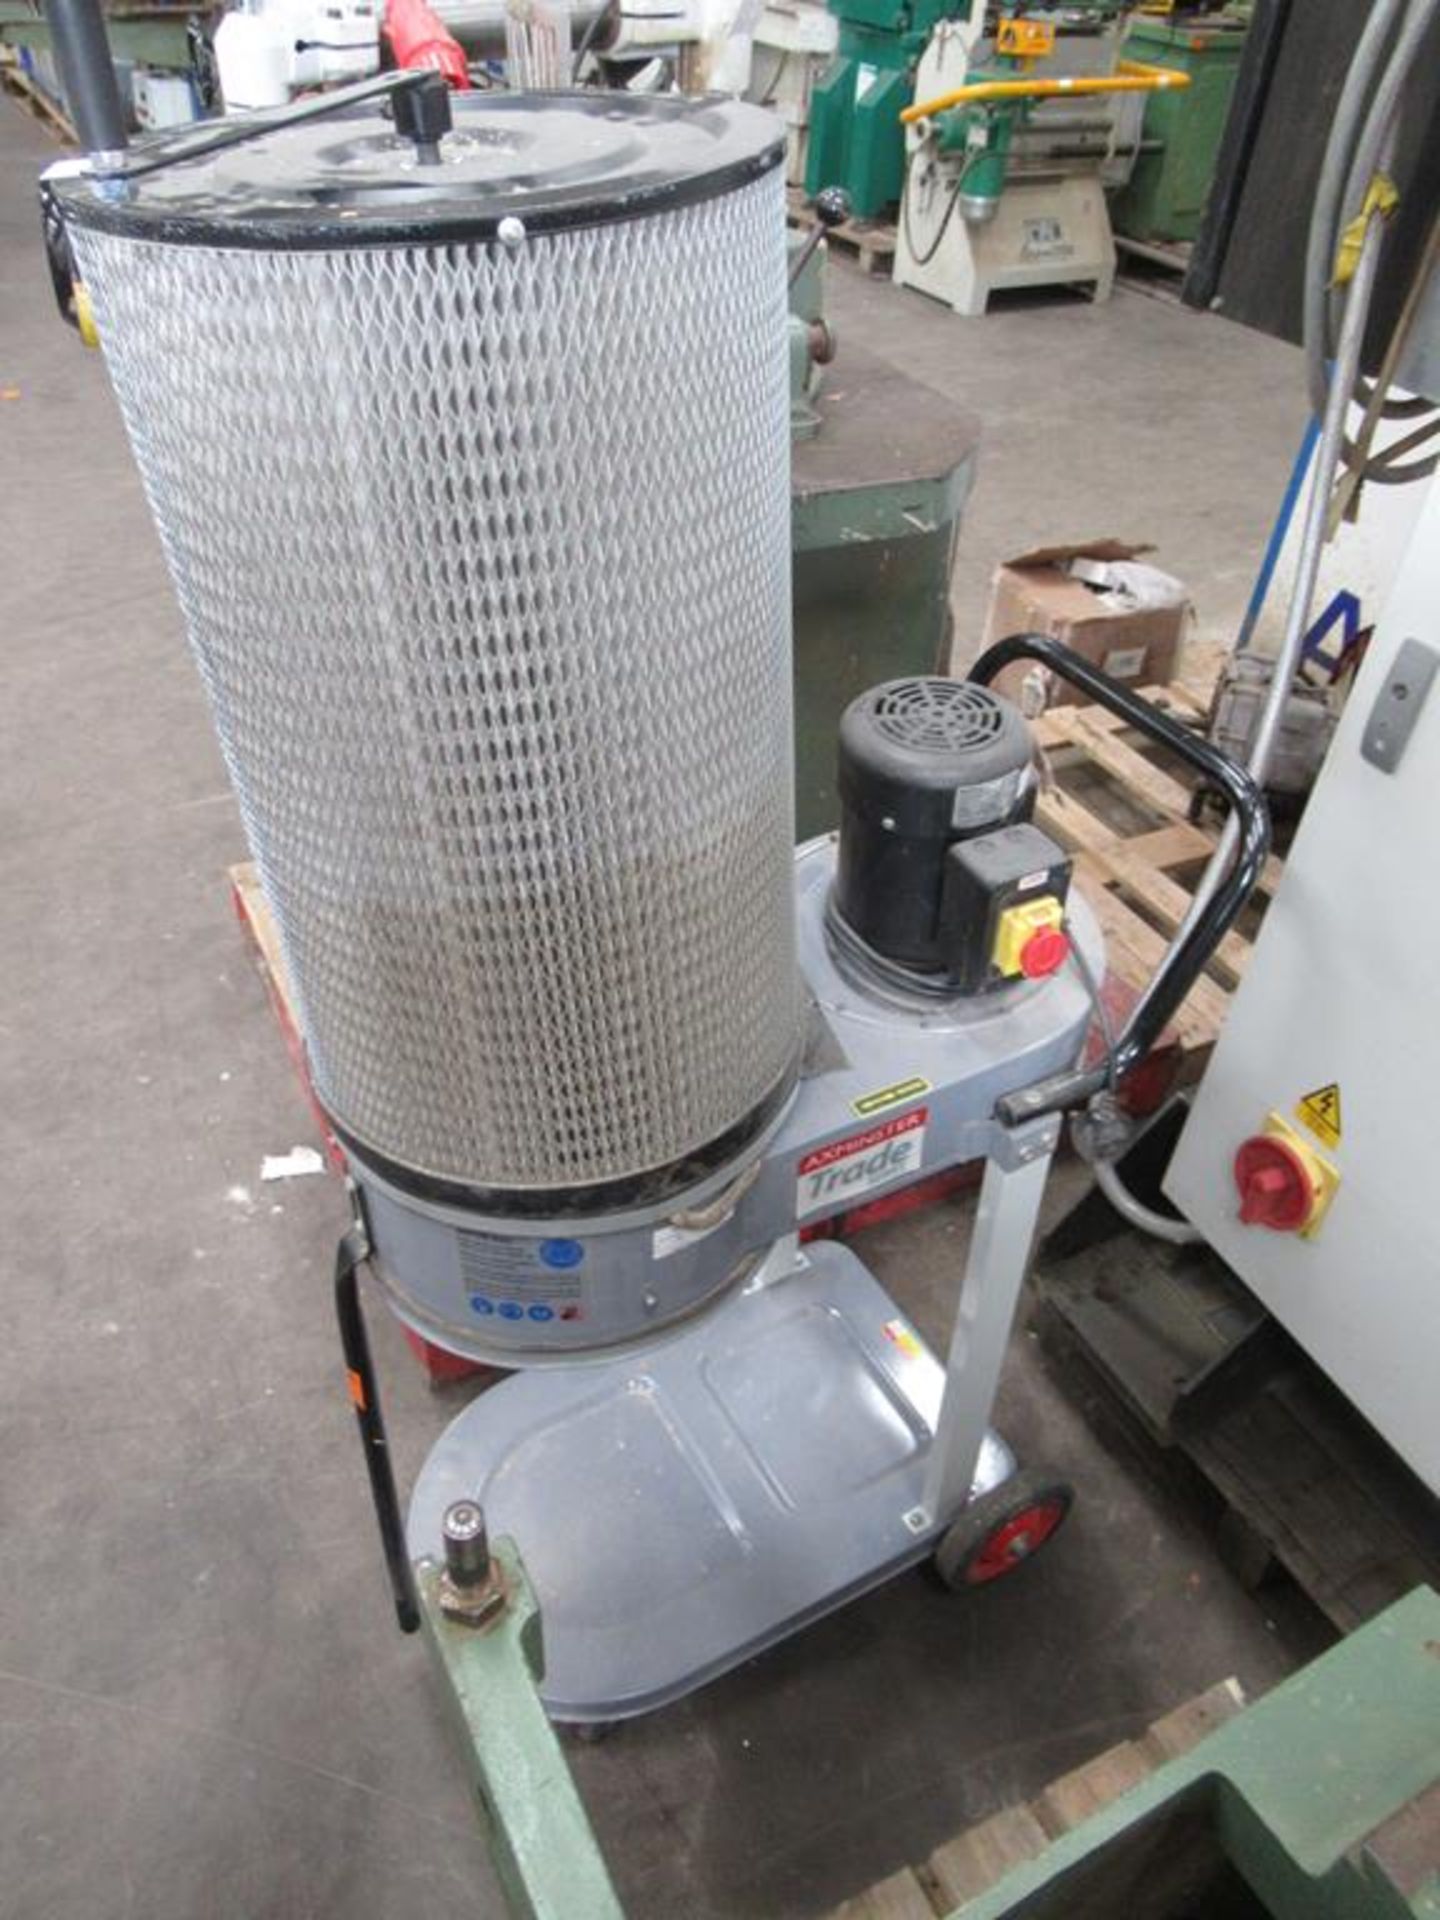 Axminster Trade CT-90H Dust Extractor, 230V, Signle Phase, 50Hz - Image 4 of 4